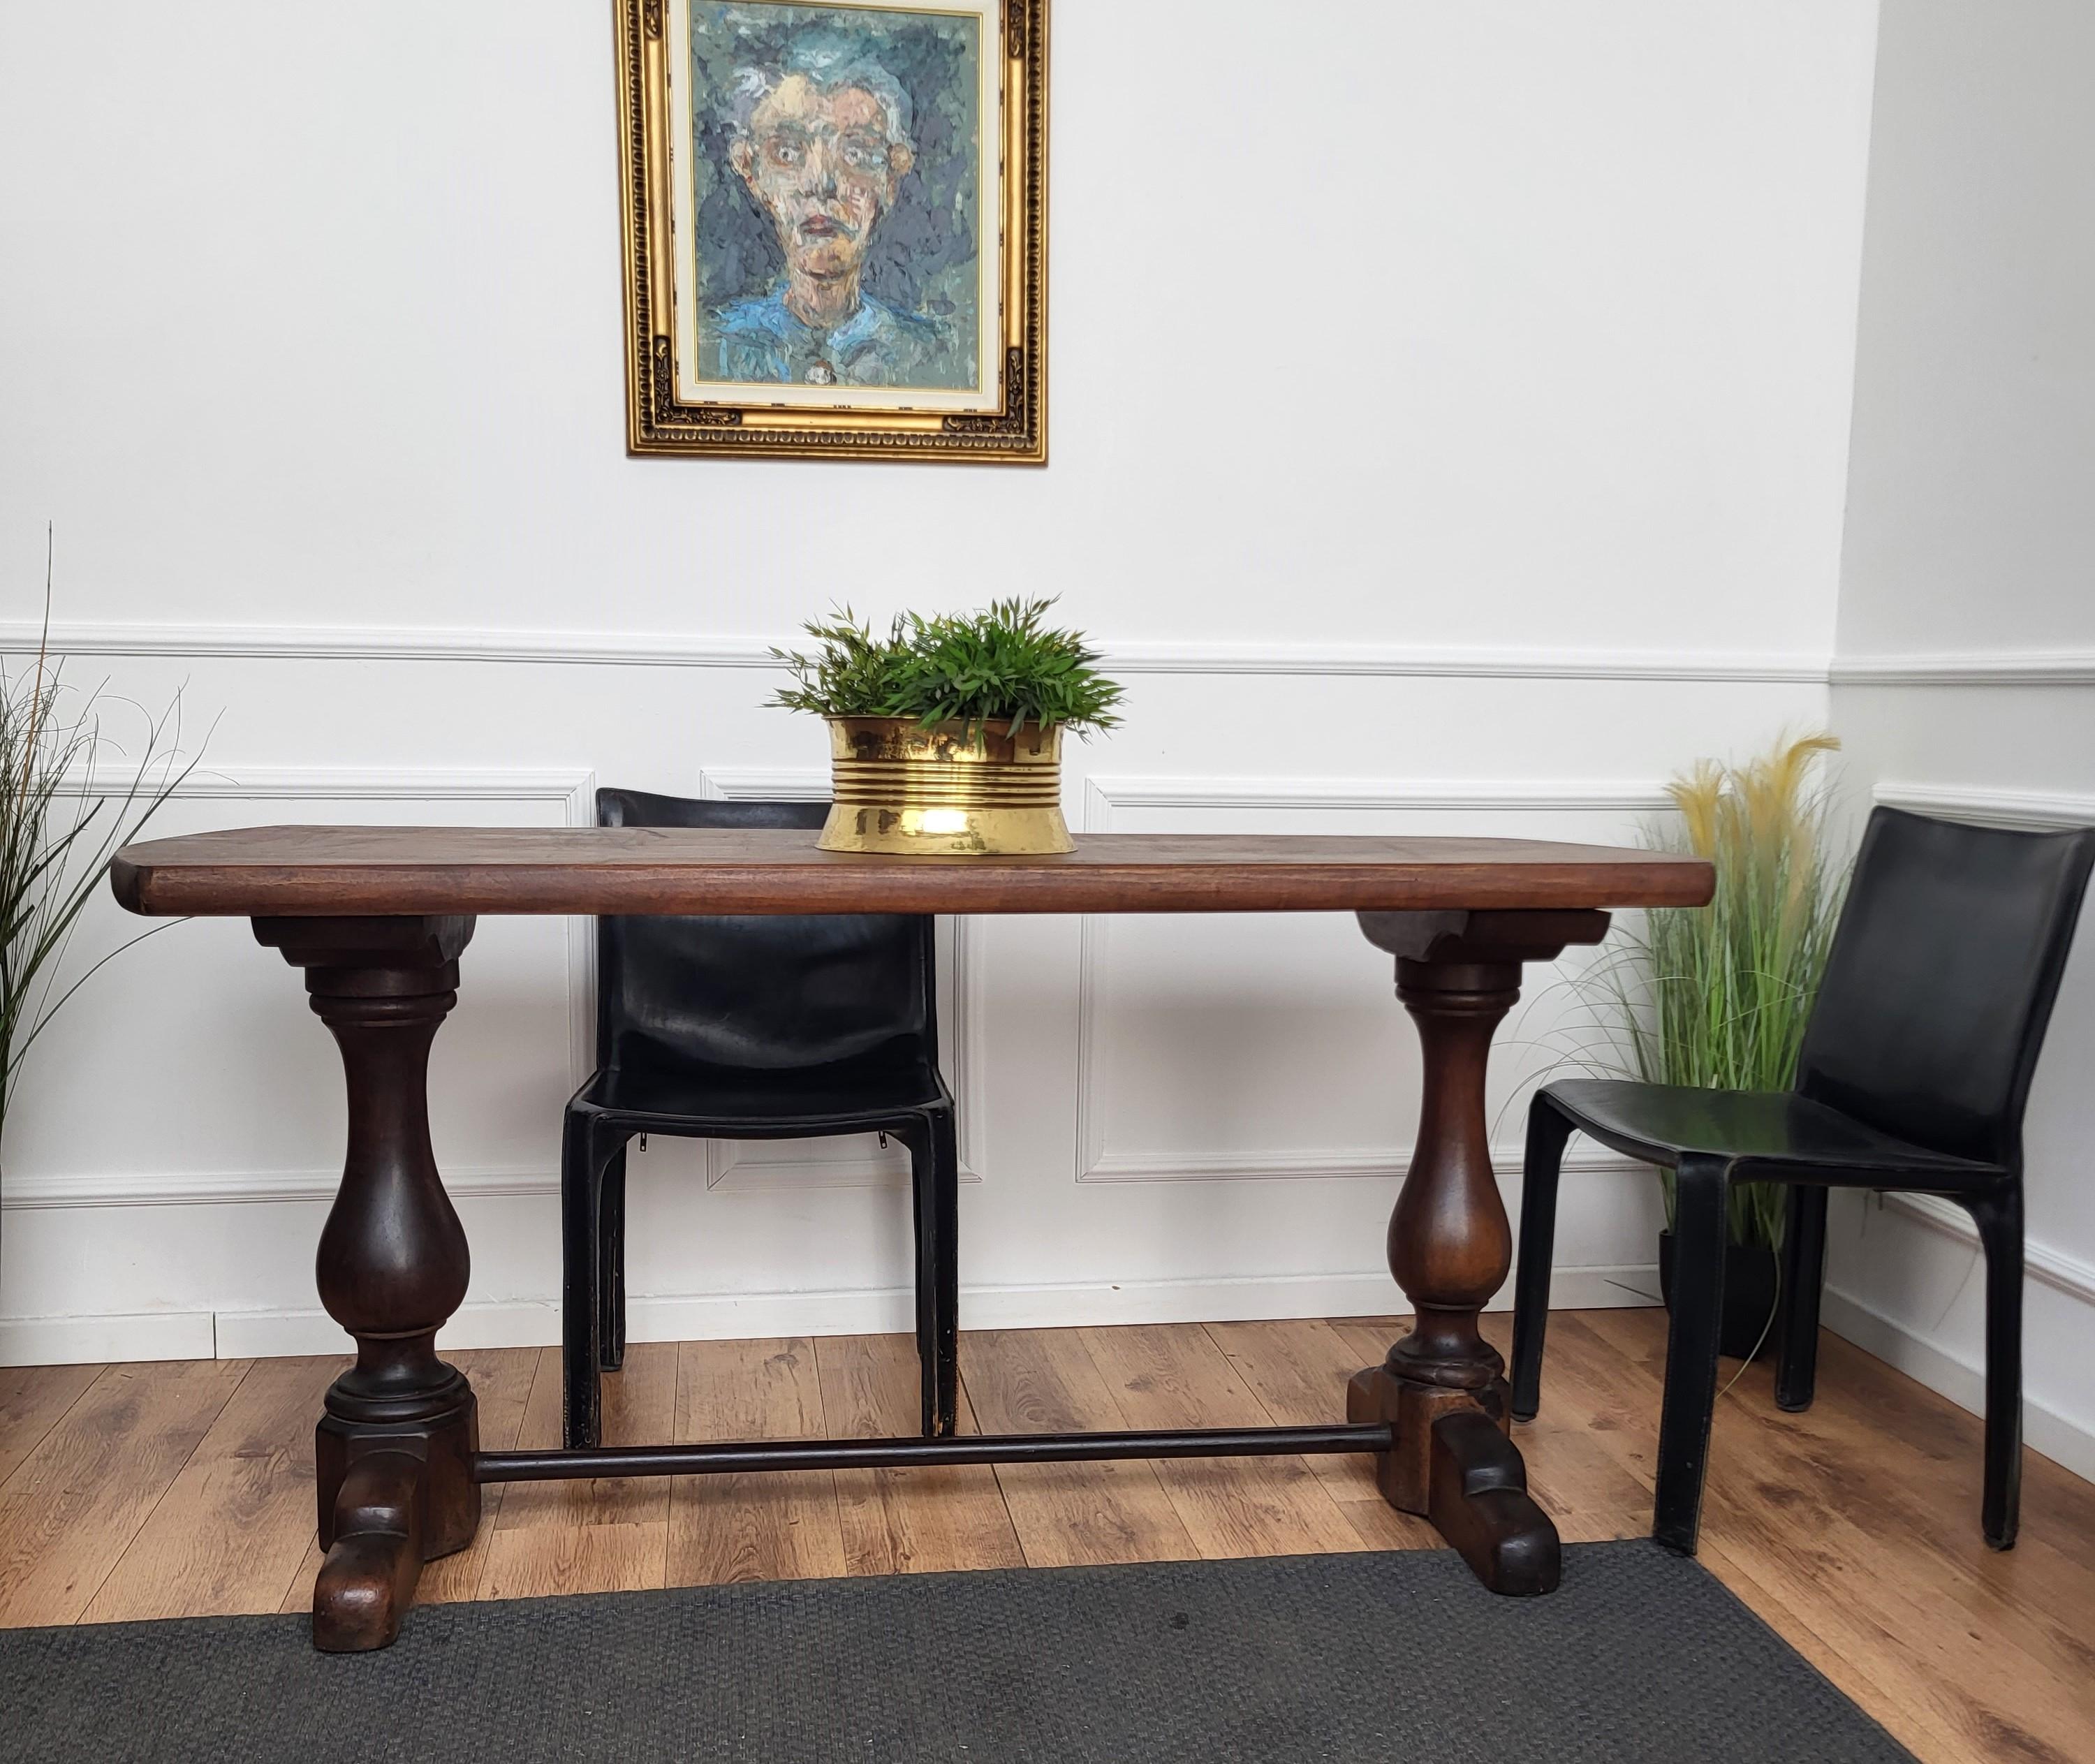 A beautifully crafted Italian refectory table with a thick top and marvellous construction and design on the trestle base. The carving on the feet adds an additional note of interest. Great color and rich patina complete the look. Solid wood